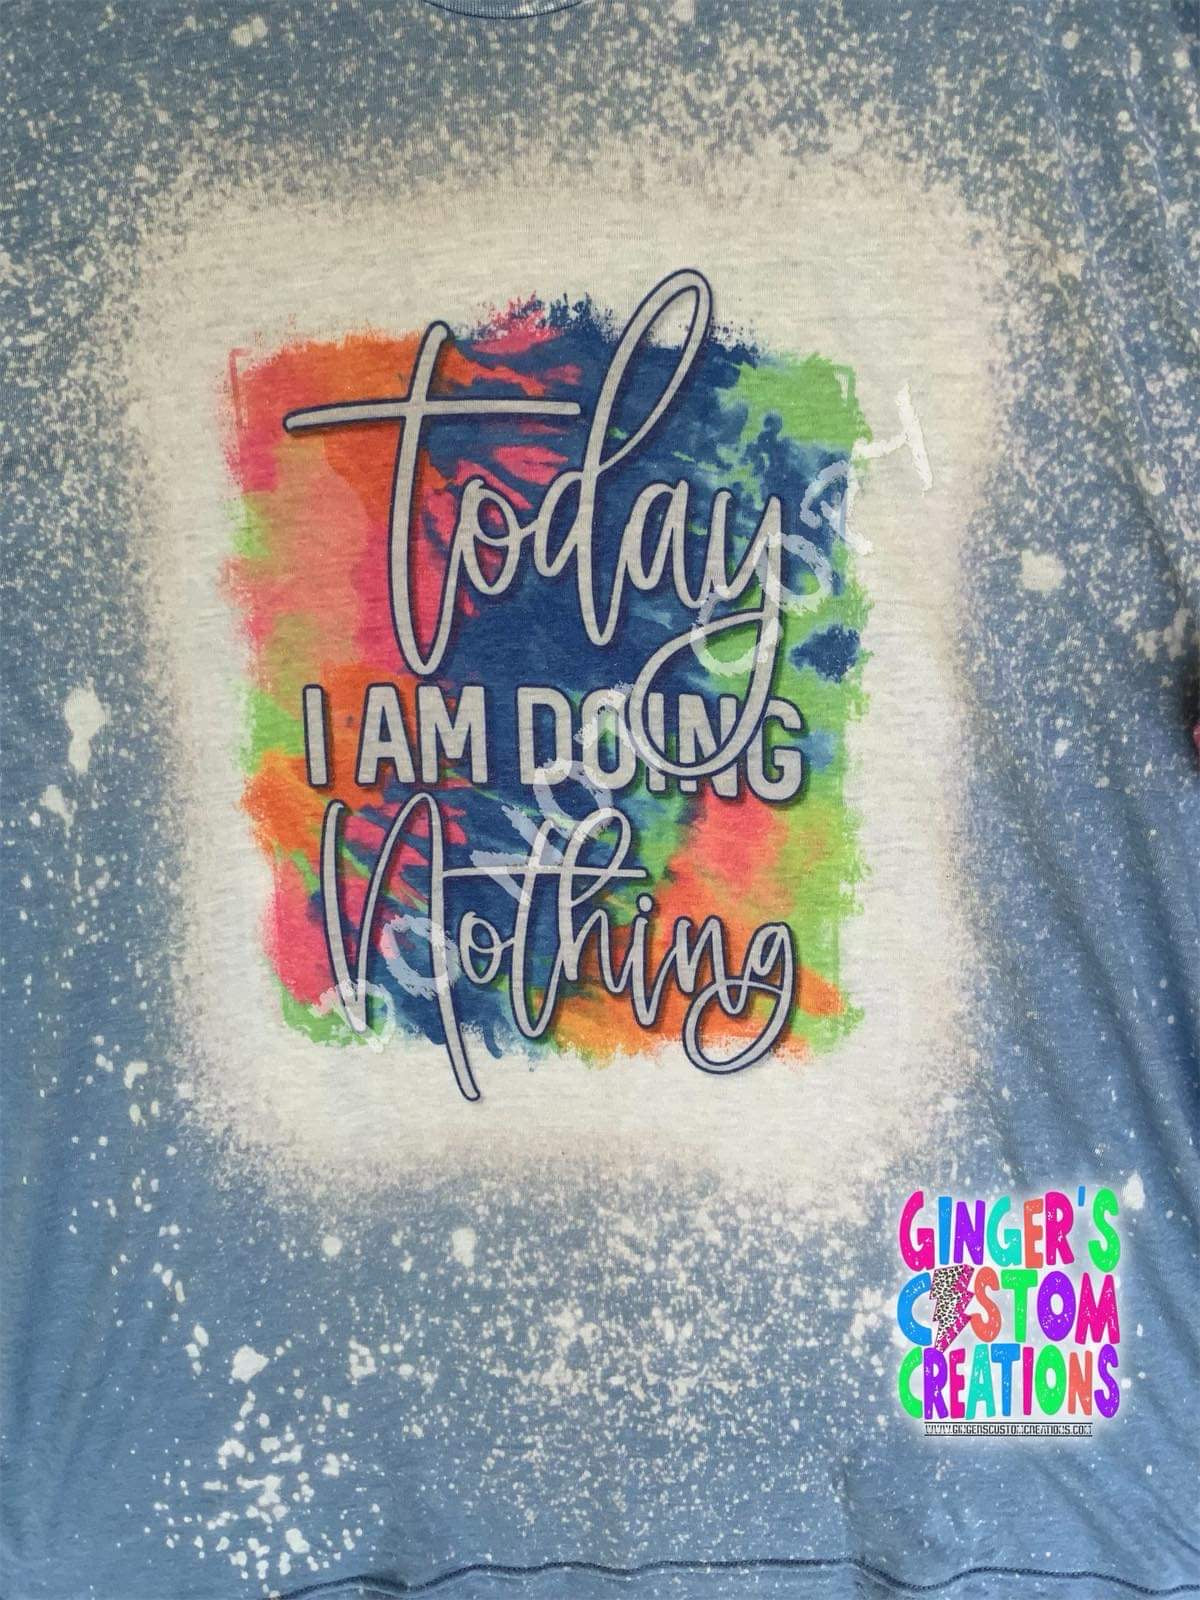 Today I am doing nothing   - BLEACHED TSHIRT